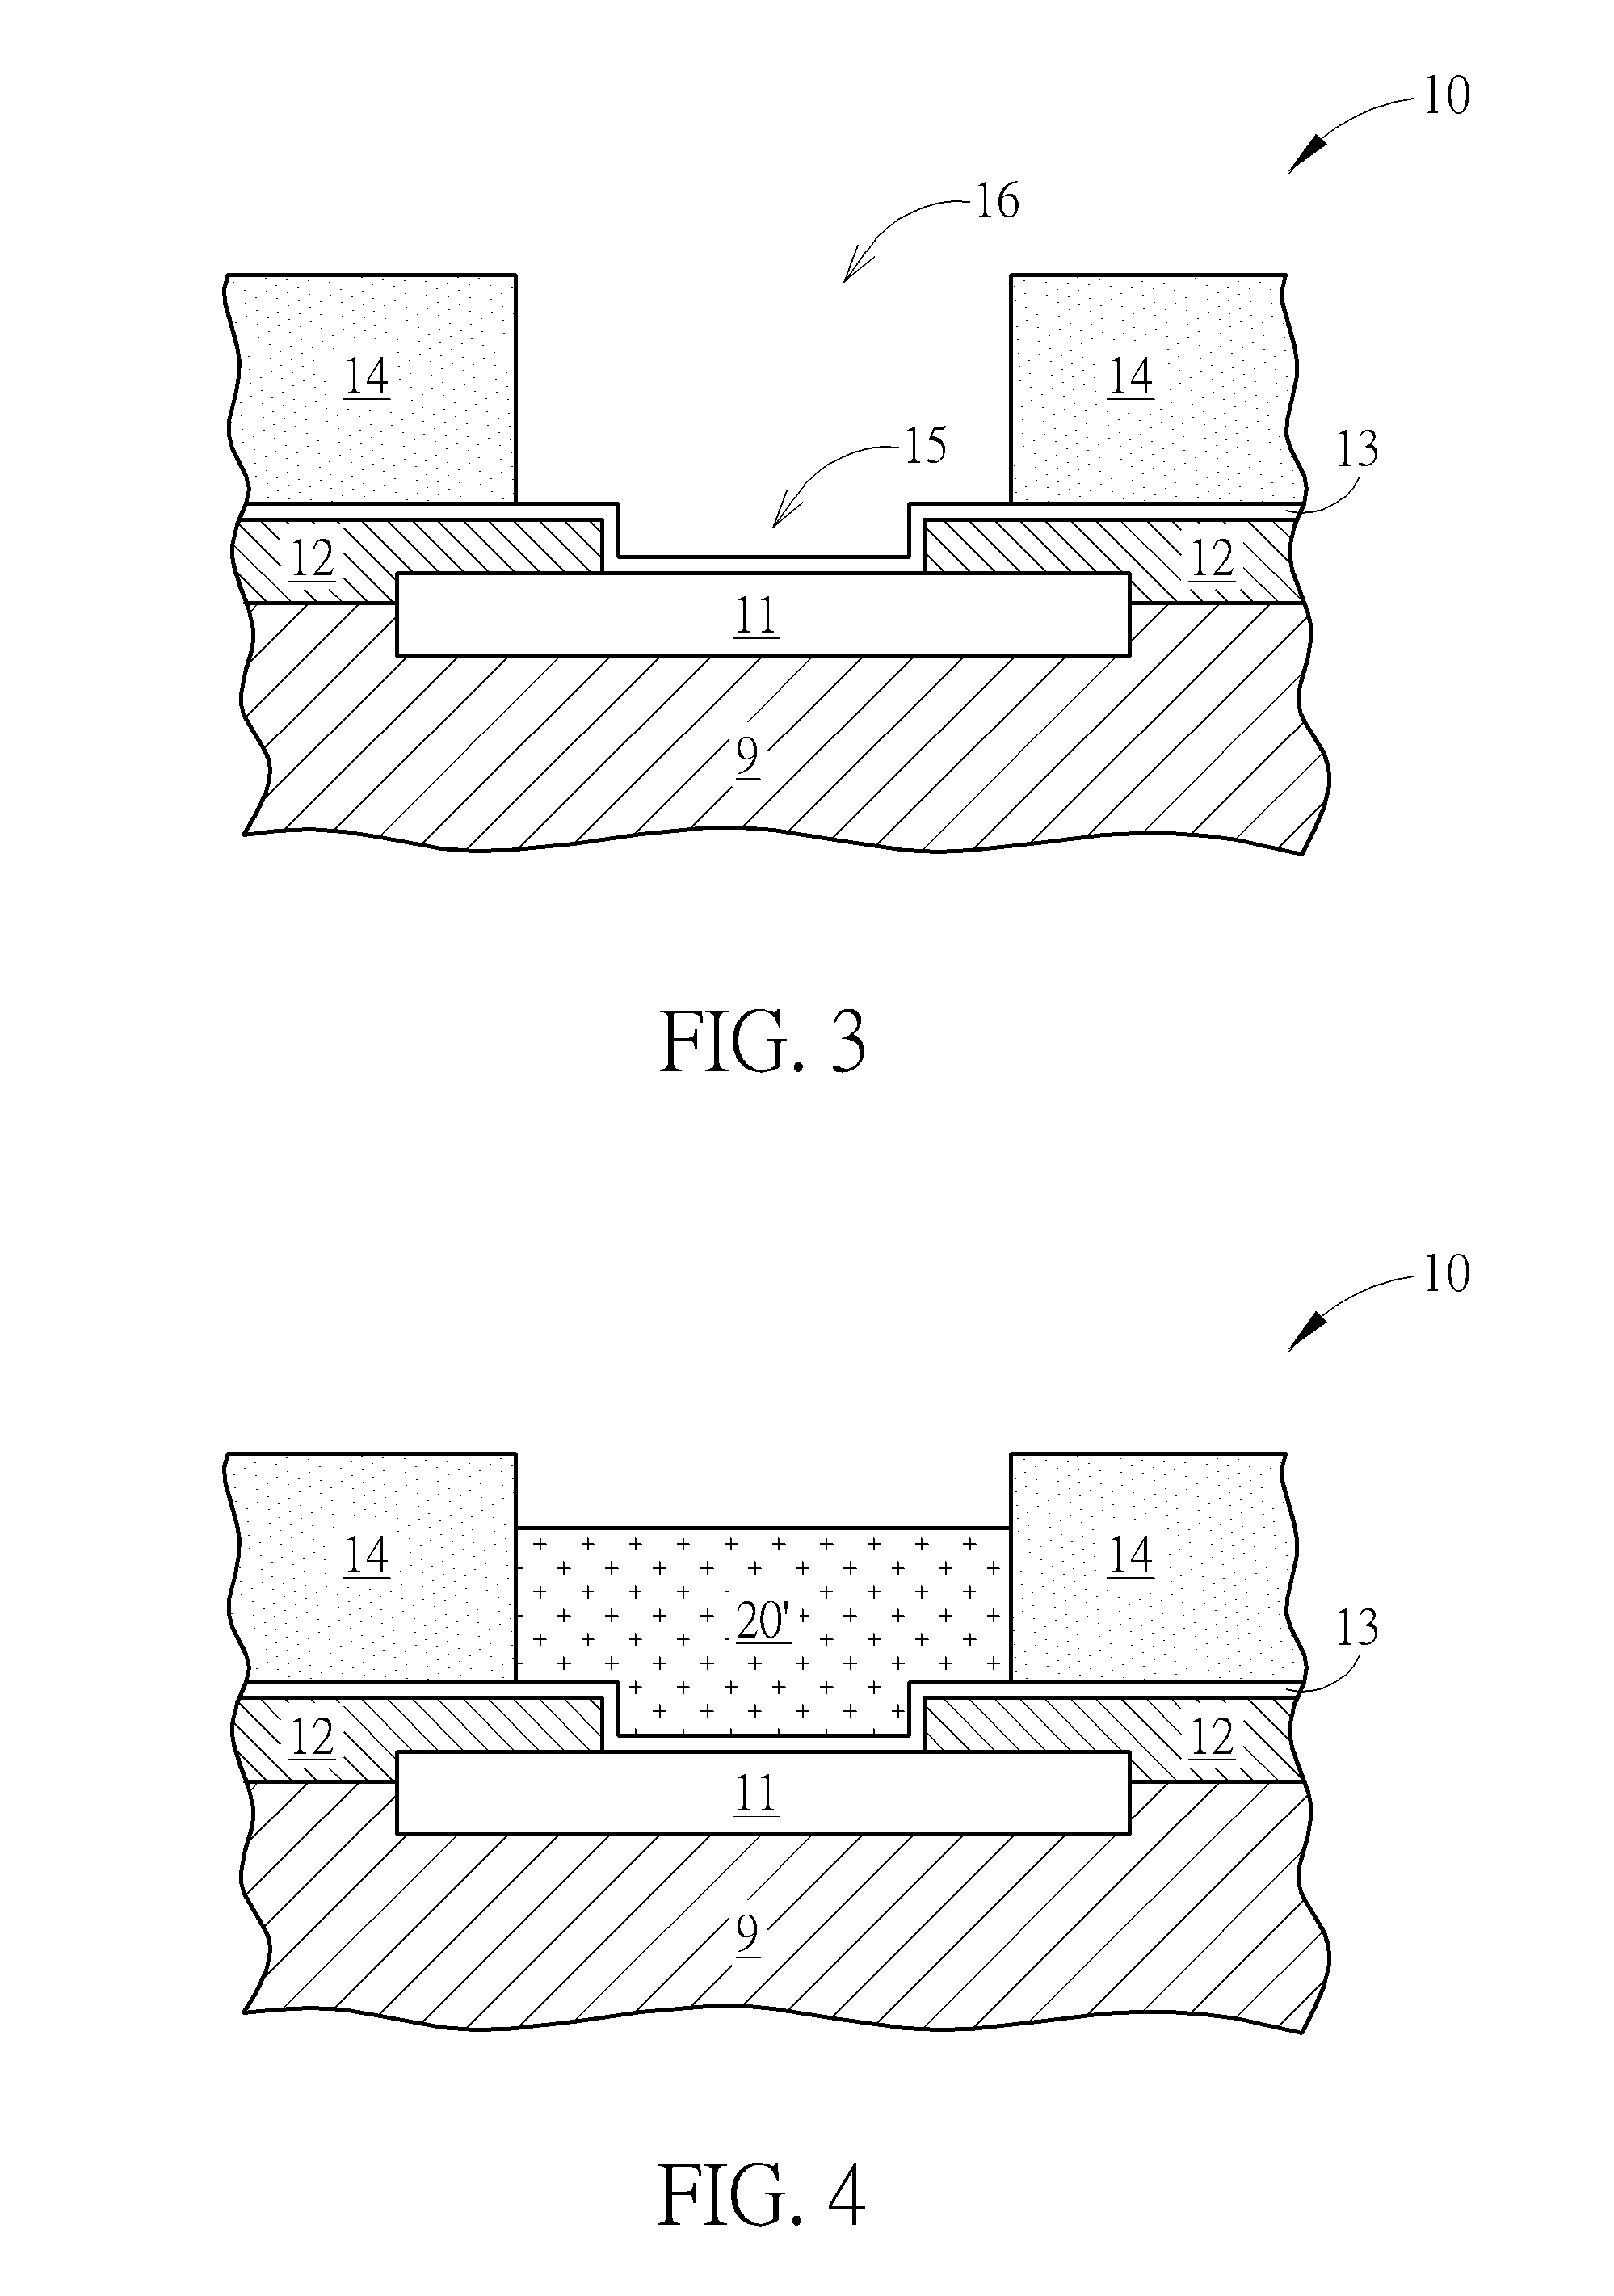 Metal bump structure for use in driver IC and method for forming the same